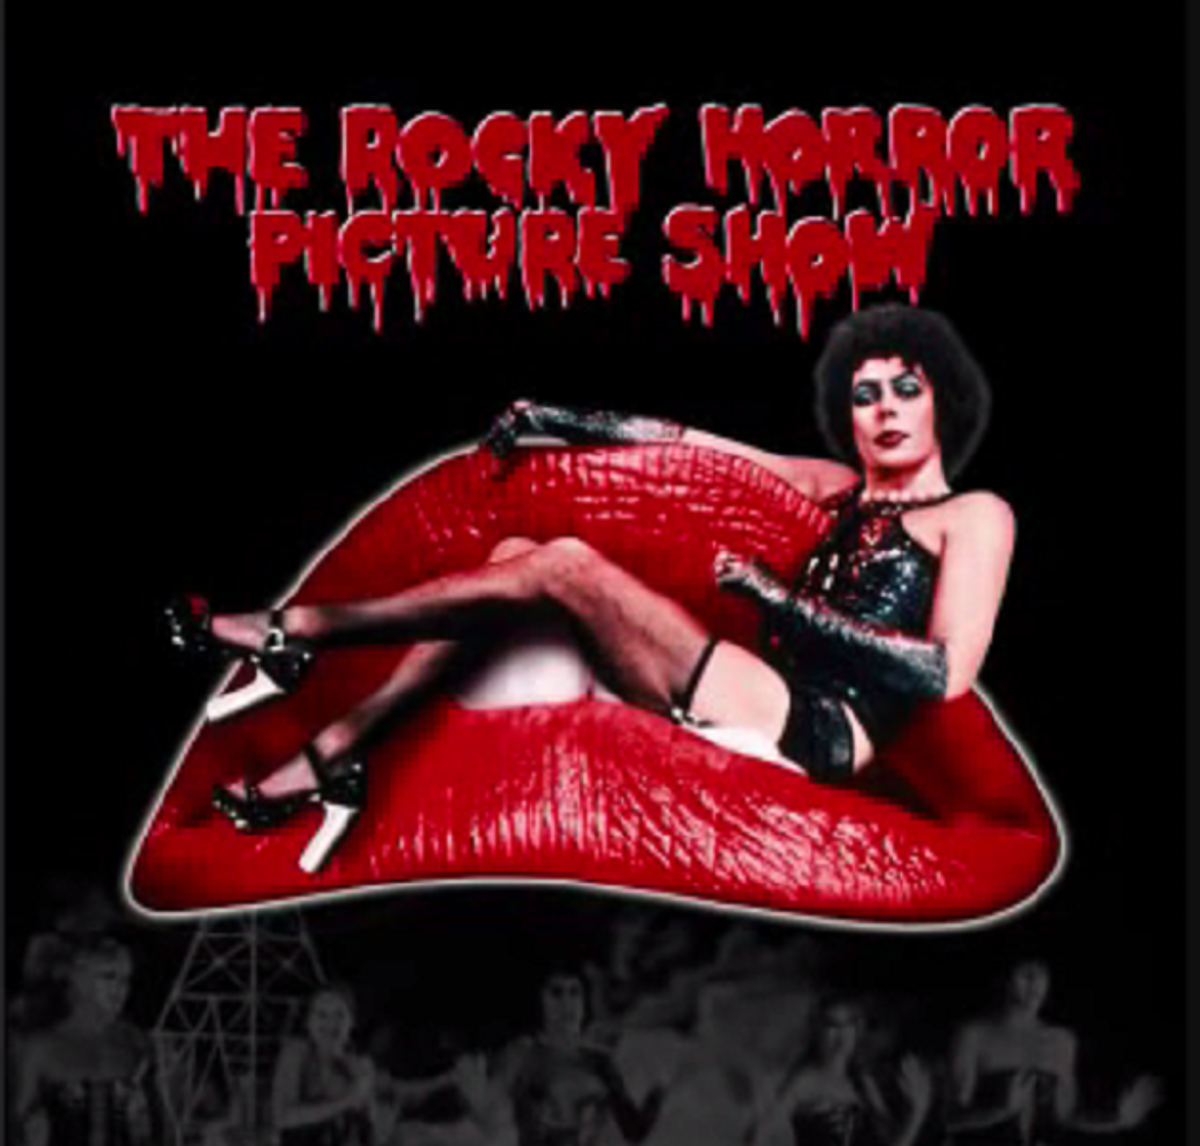 "The Rocky Horror Picture Show:" Is Still Time Warping Into The Future